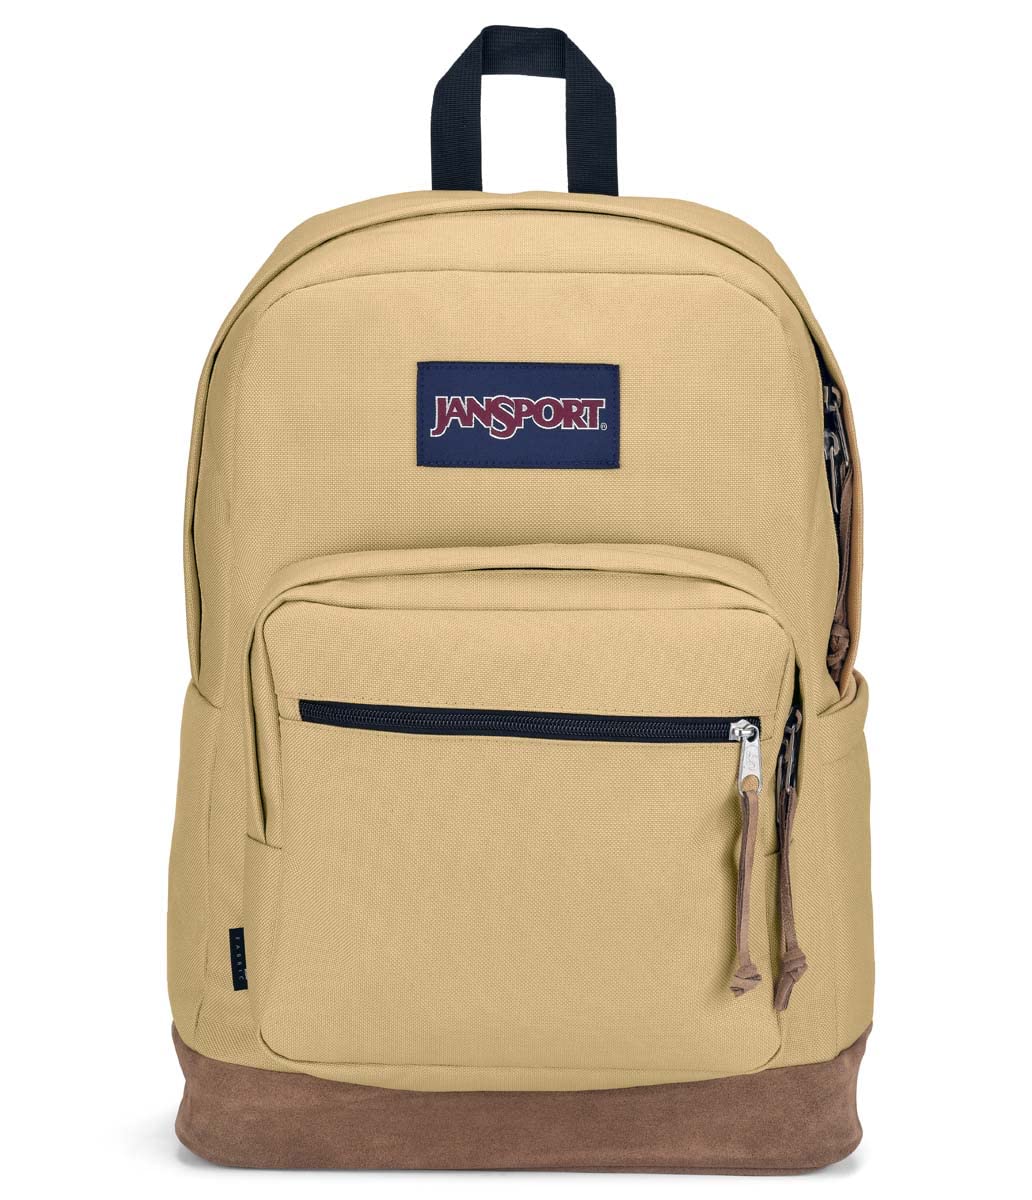 JanSport Right Pack Backpack - Travel, Work, or Laptop Bookbag with Leather Bottom, Curry